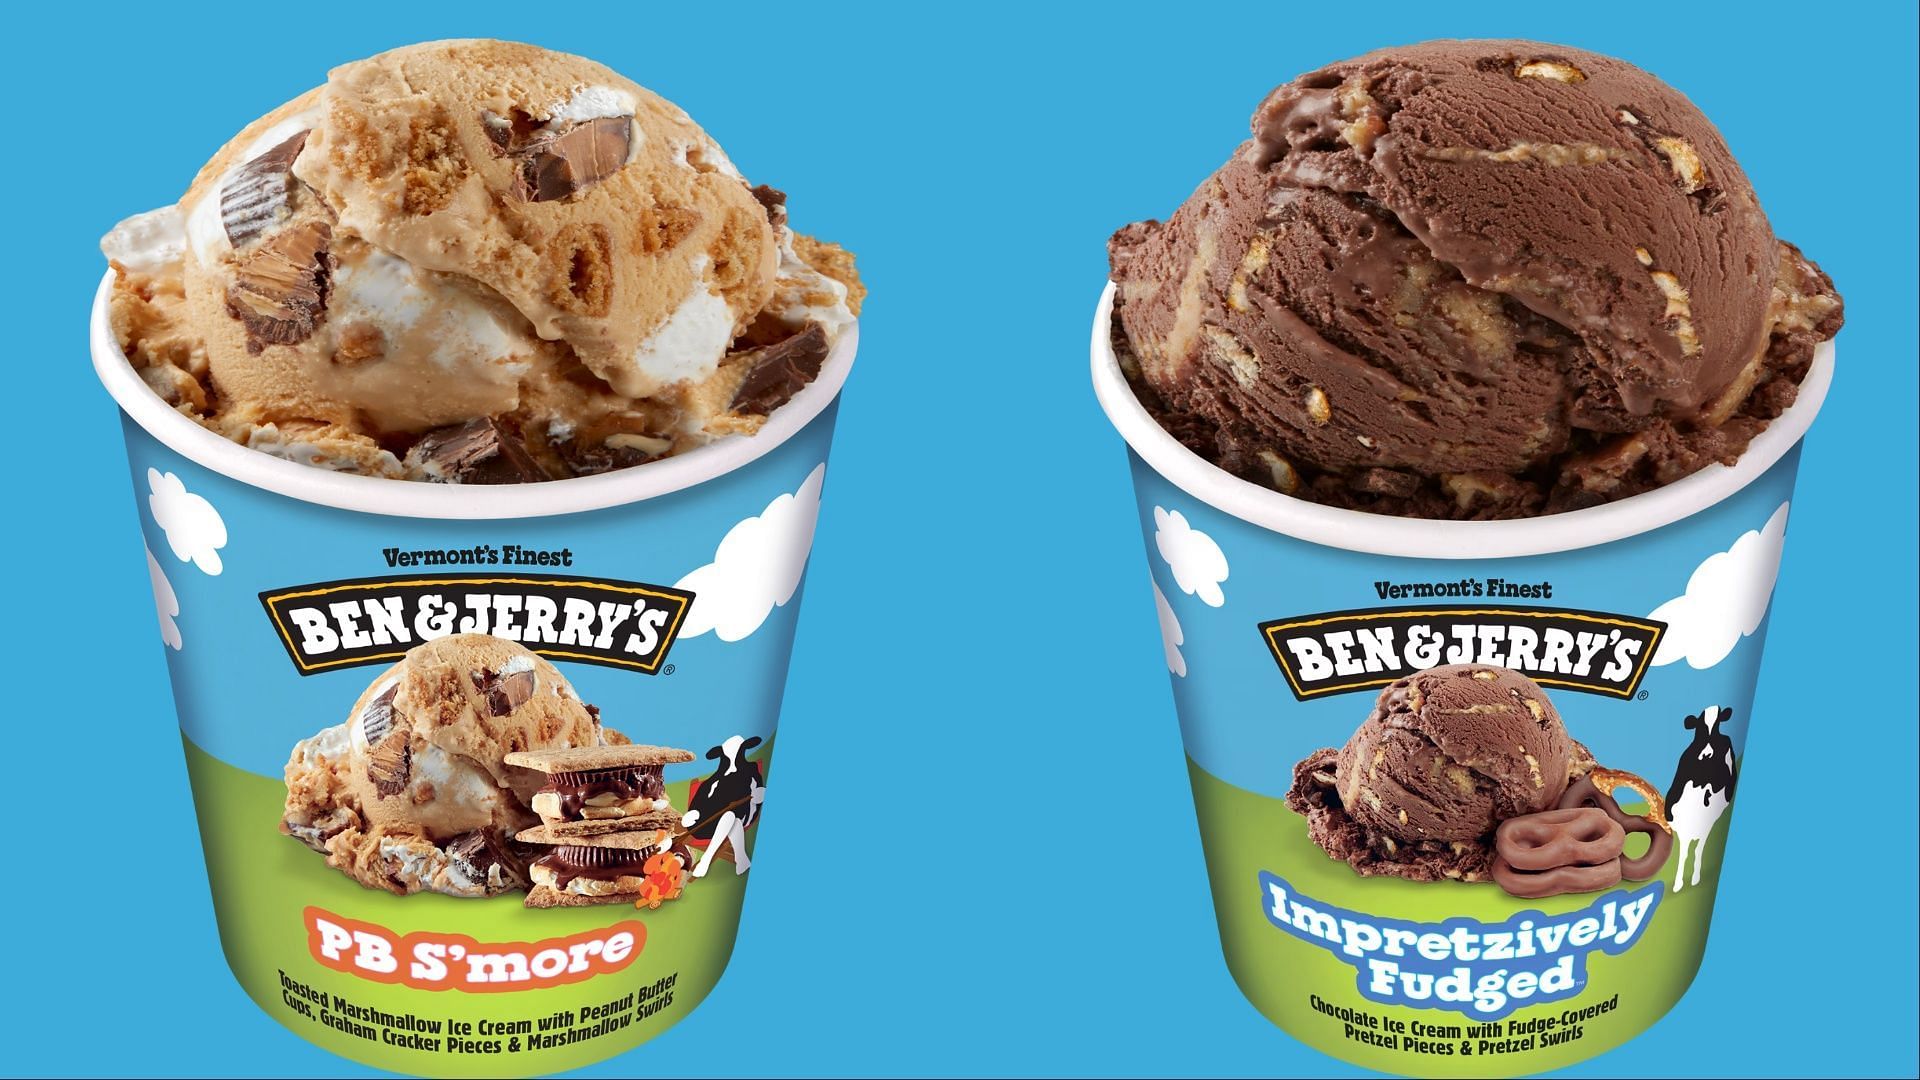 The Impretzively Fudged and PB S&rsquo;more flavors are available in stores and scoop shops starting January 24 (Image via Ben &amp; Jerry&rsquo;s)